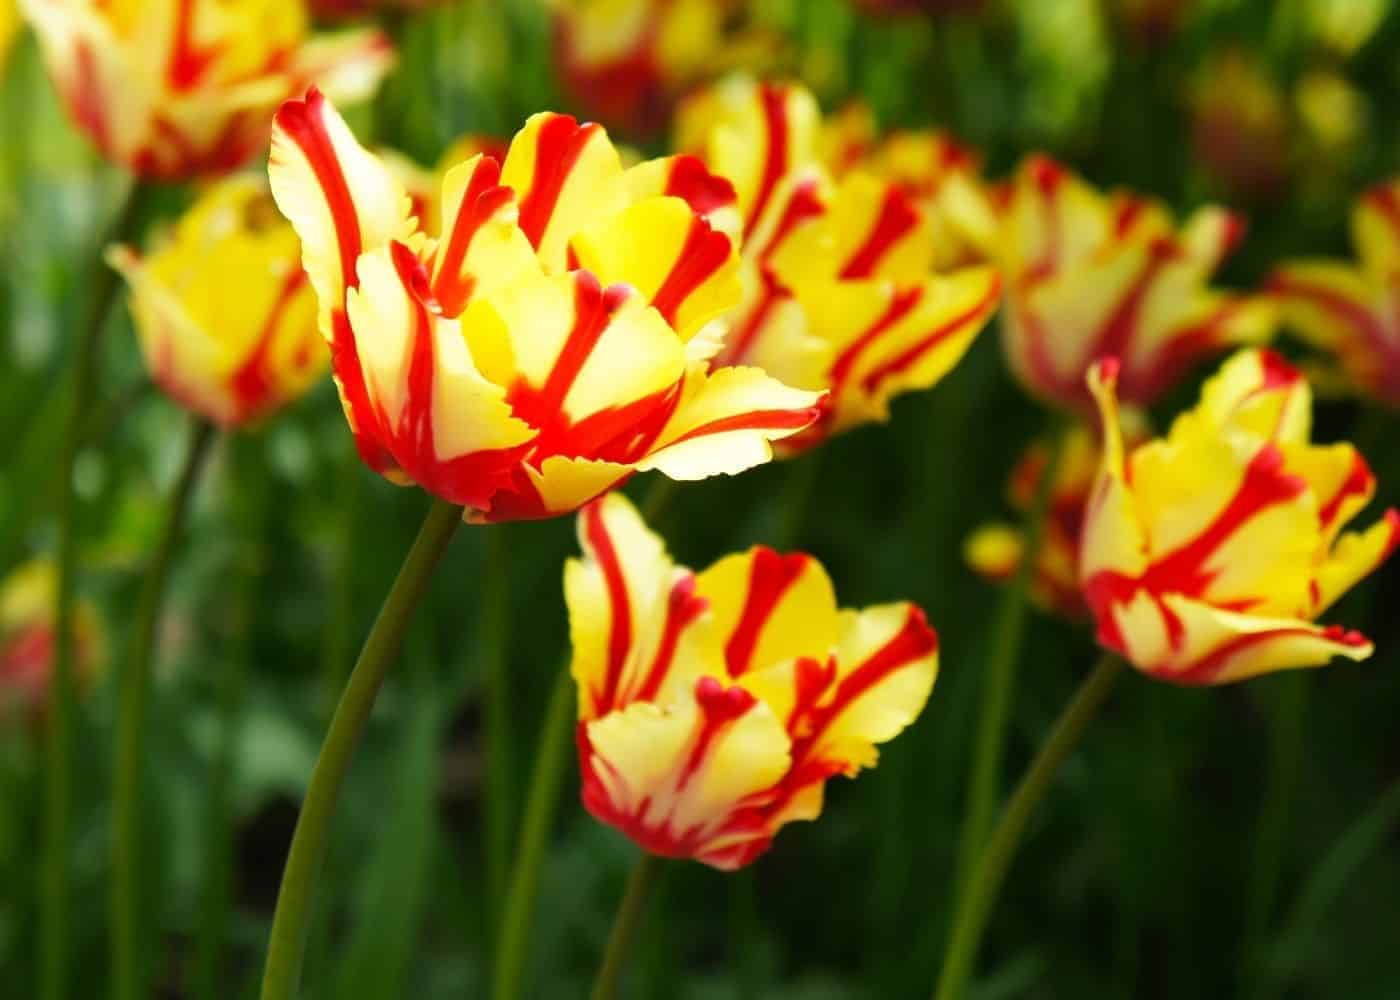 Texas flame tulips - yellow tulips with red stripes